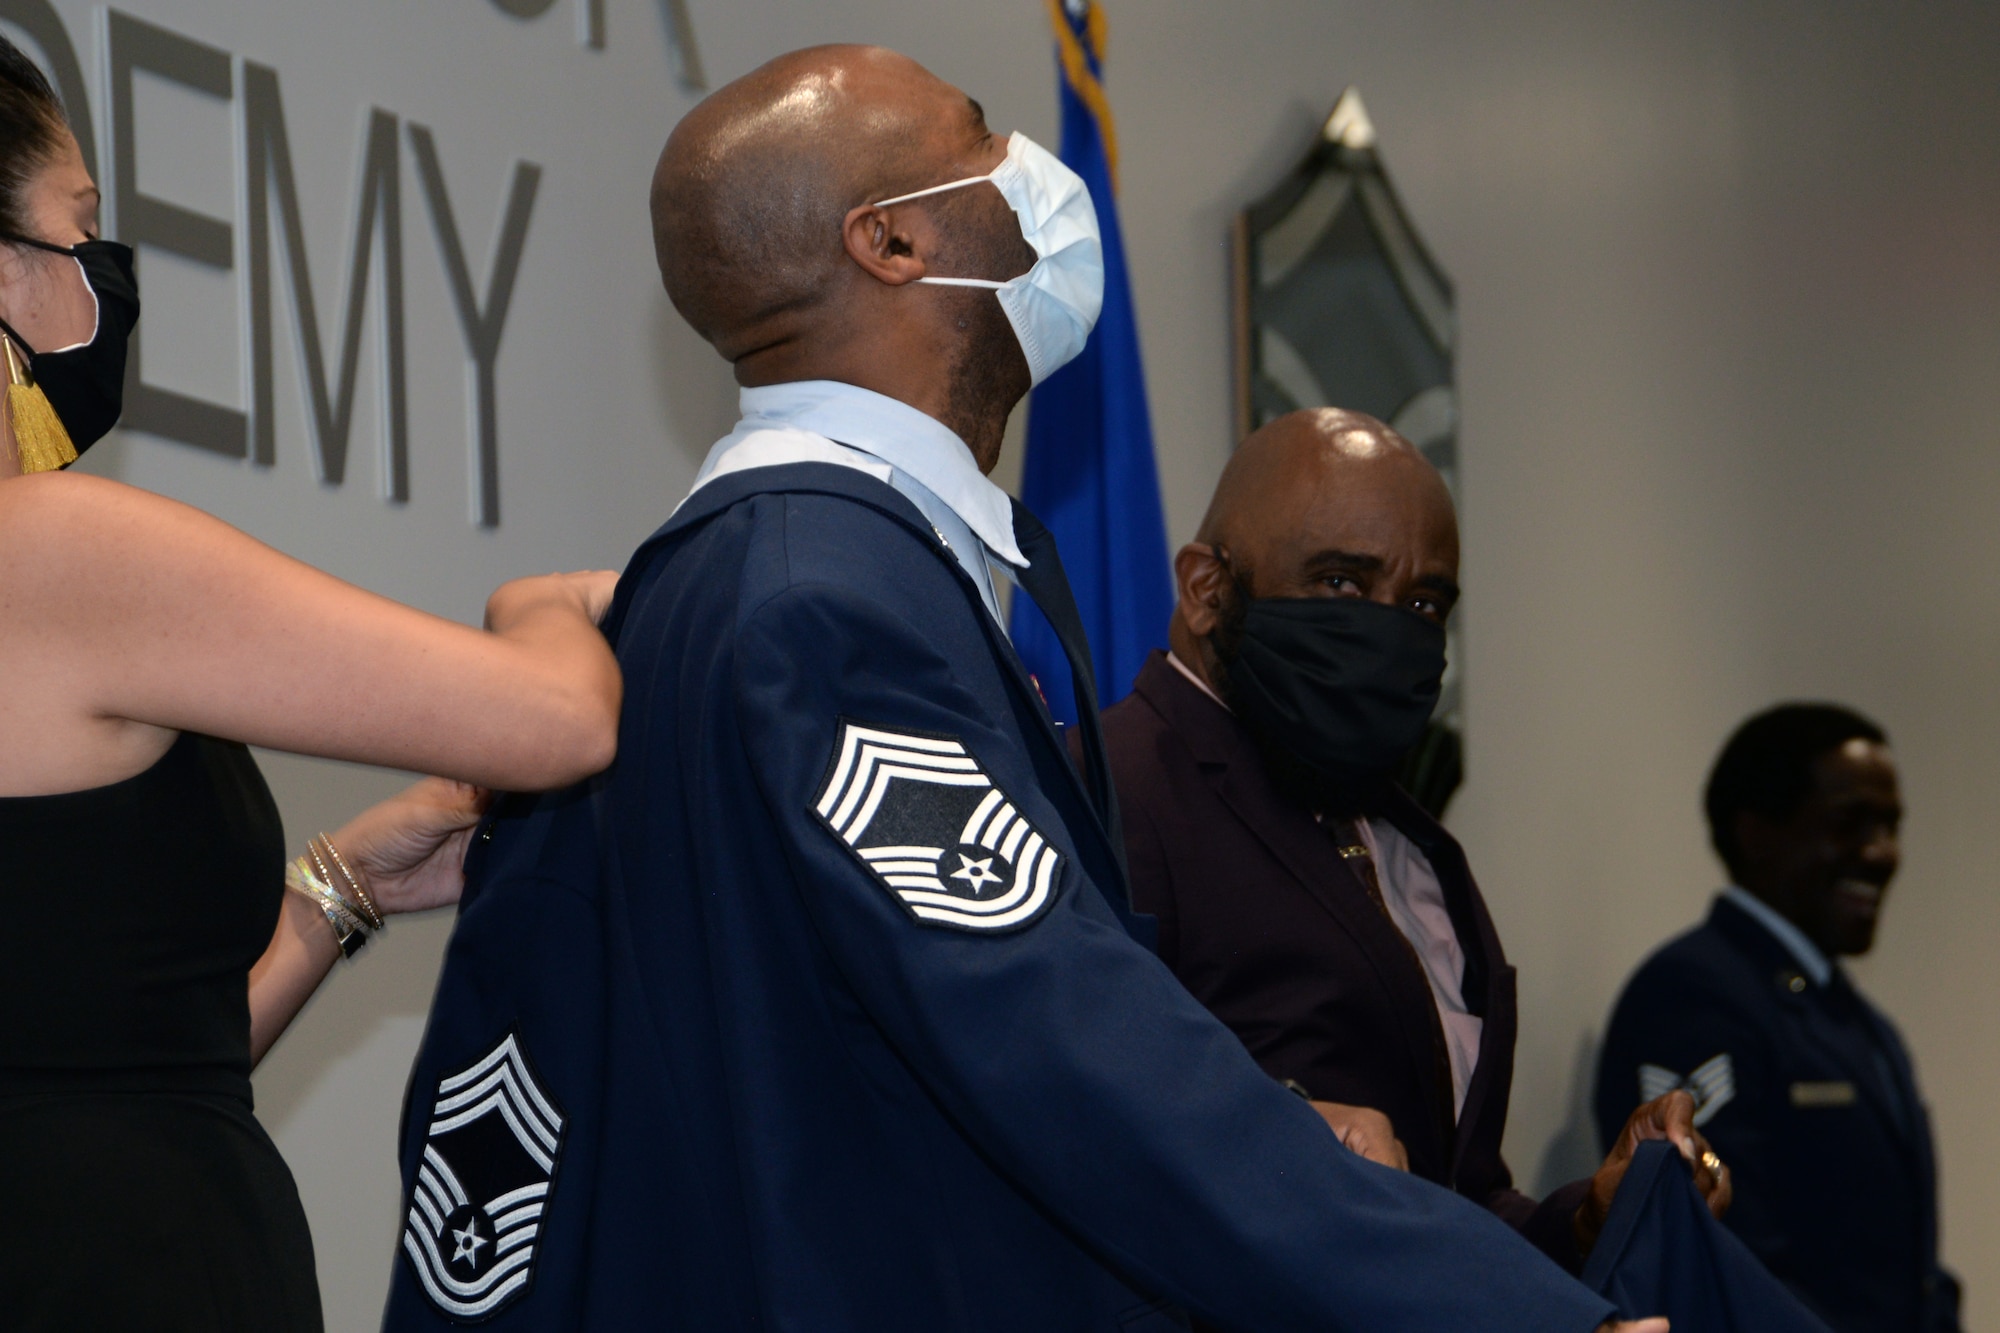 Chief Master Sgt. Howard Dixon dons a service coat with his new rank with the assistance of his wife and father during a promotion ceremony Oct. 3, 2020 at Joint Base San Antonio-Lackland, Texas.